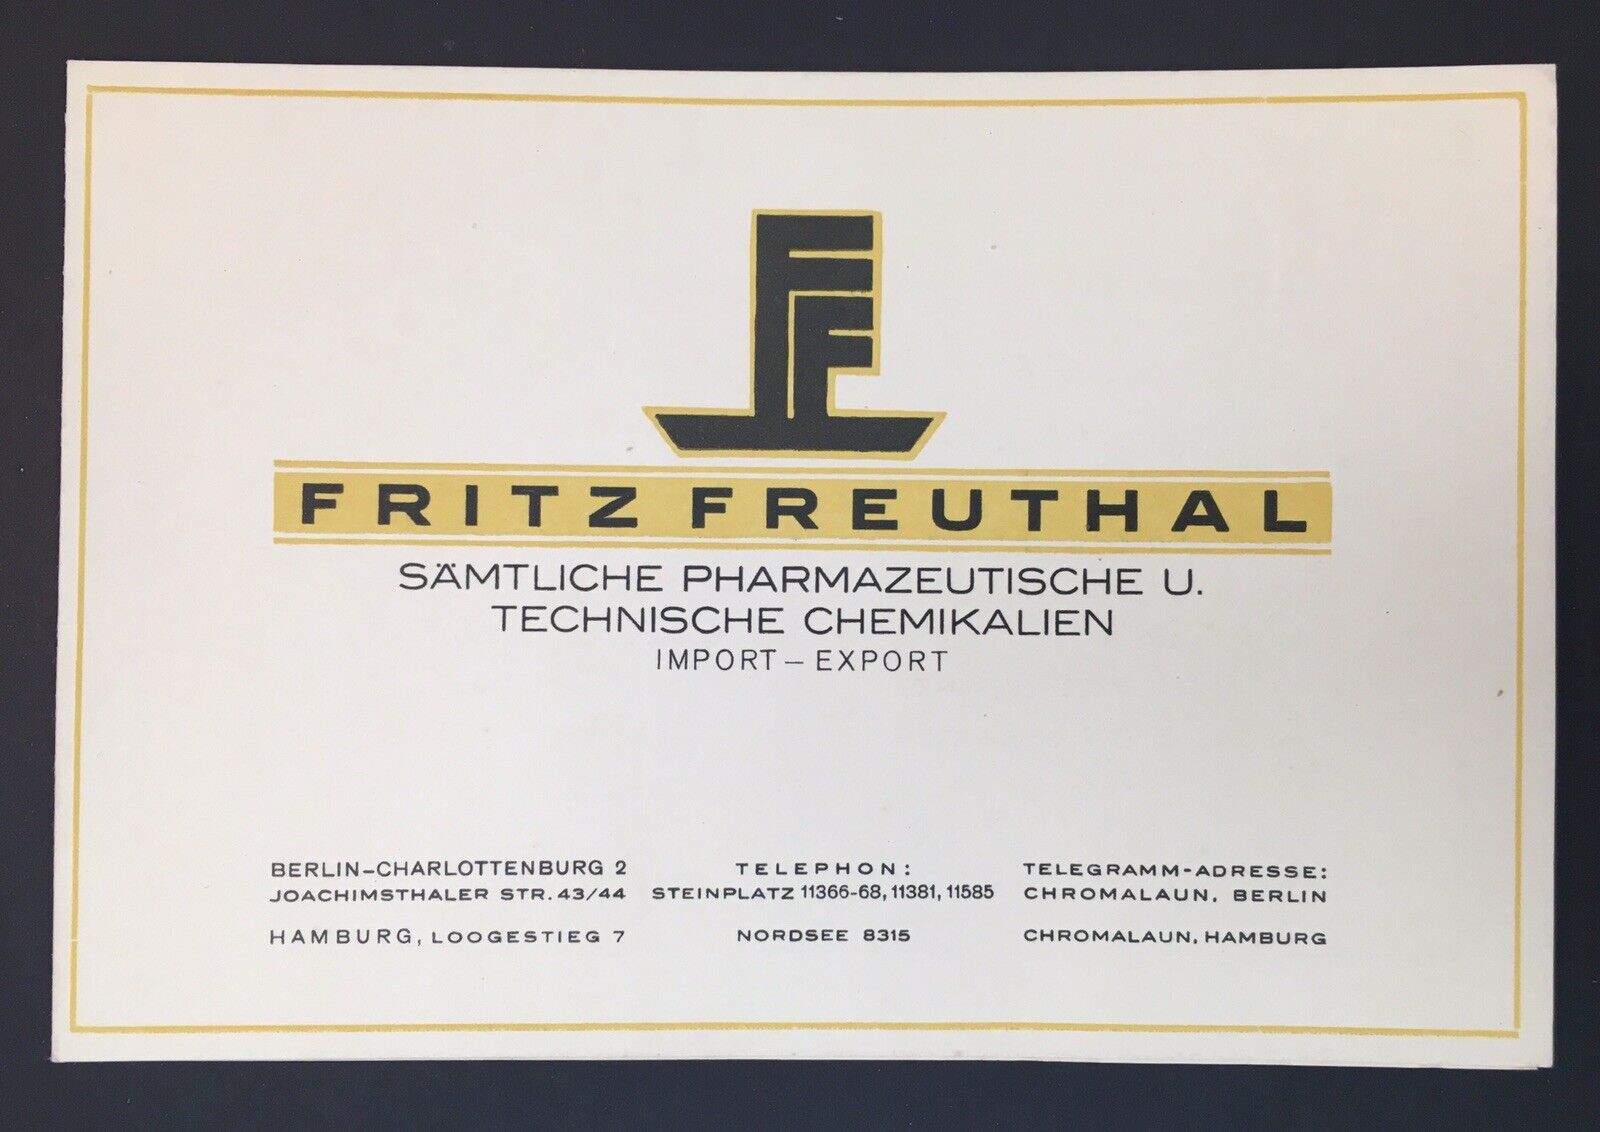 Fritz Freuthal Pharmaceutical & Industrial Chemicals Advertisement Card Berlin